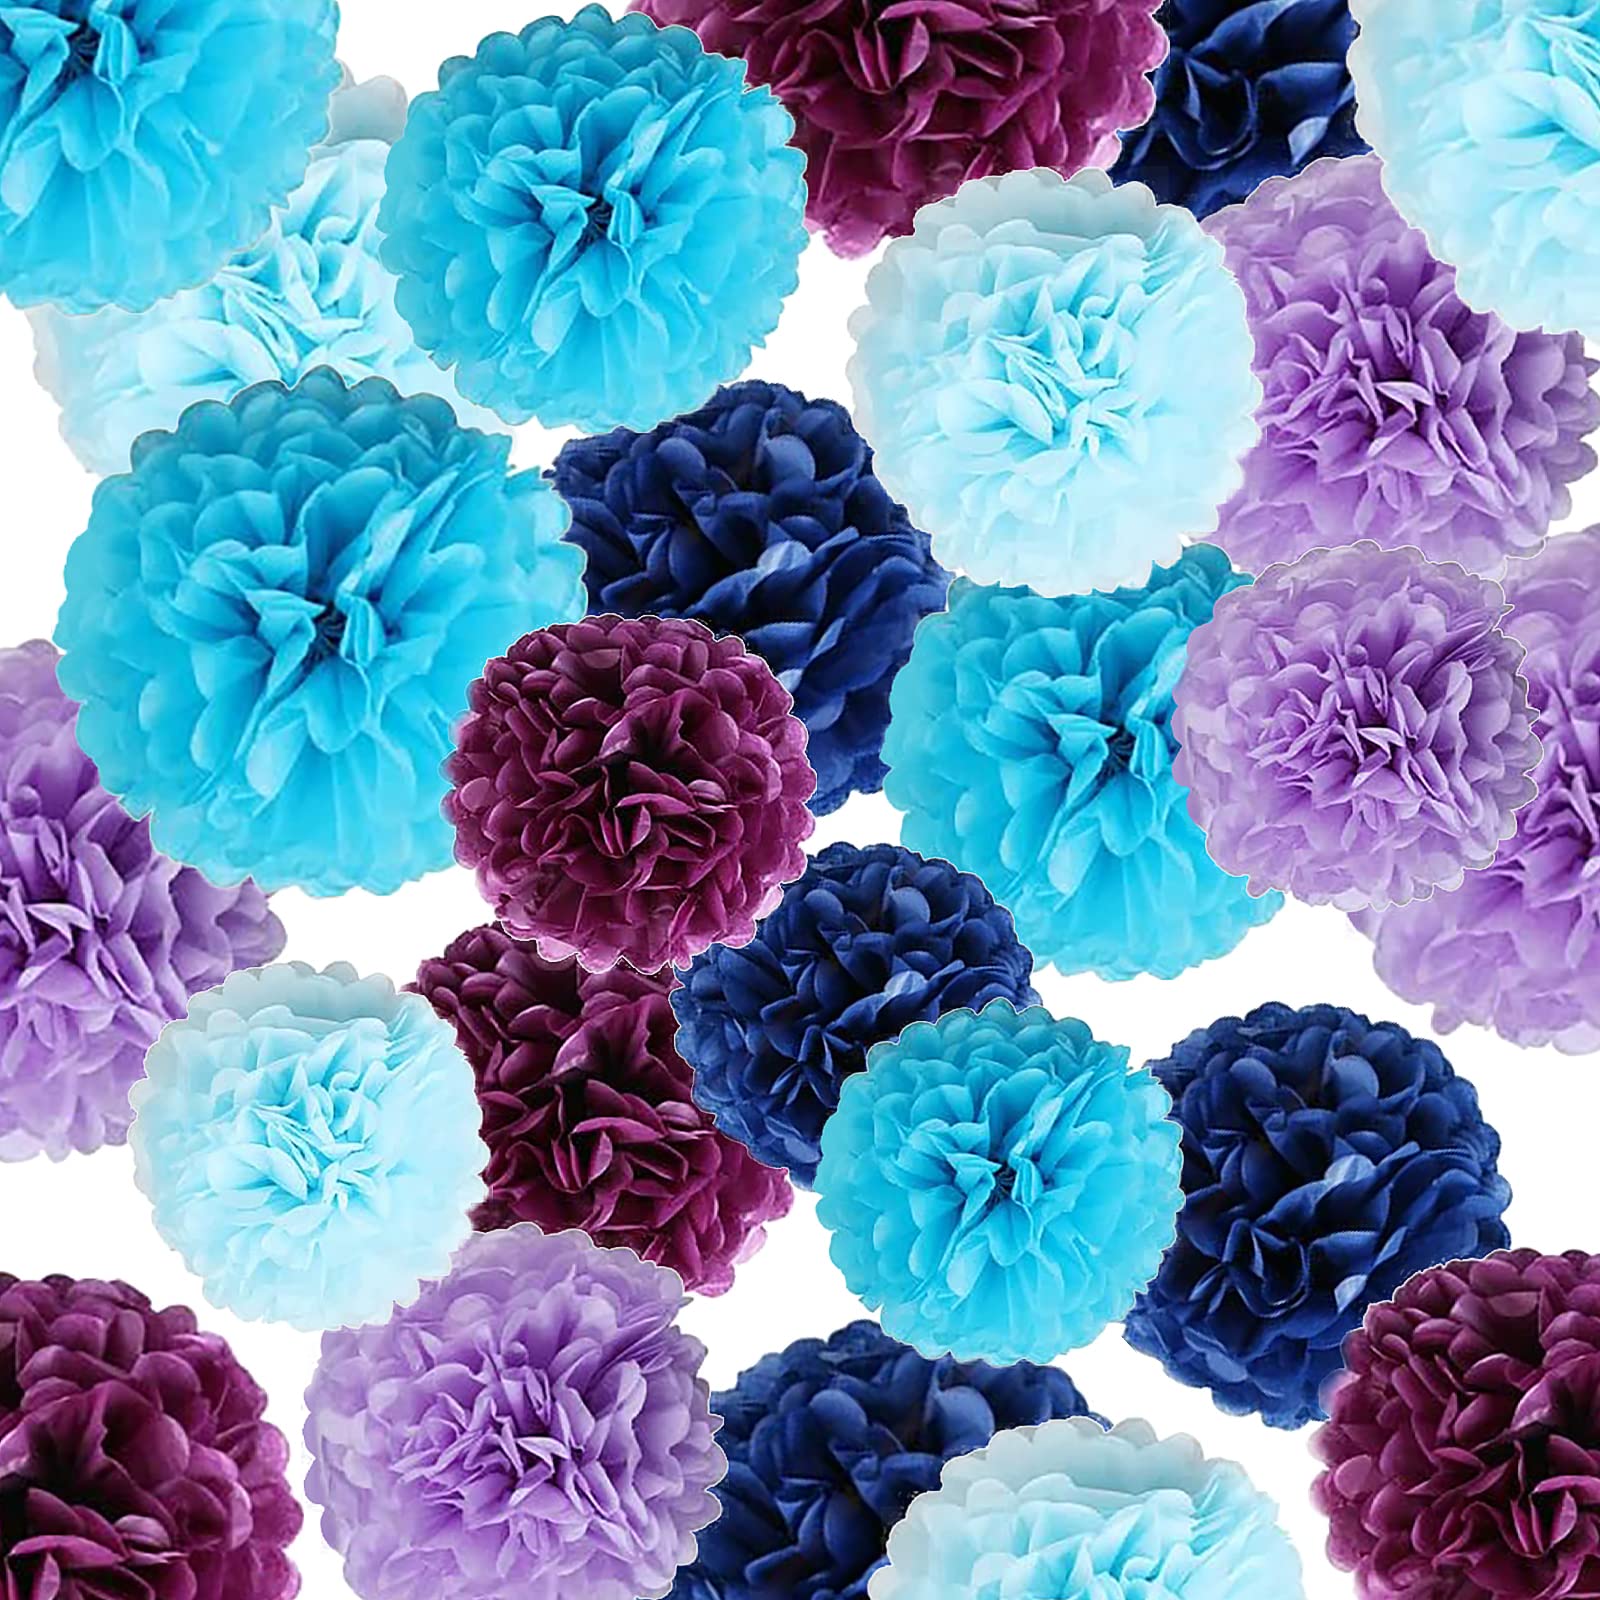 25PCS Paper Pom Poms for DIY Crafts Tissue Paper Flowers Large Small  Hanging Flowers Pom Poms for Baby Shower Party Decorations Wedding Backdrop  Birthday Party Christmas Home Decor Blue Mix 25pcs Paper